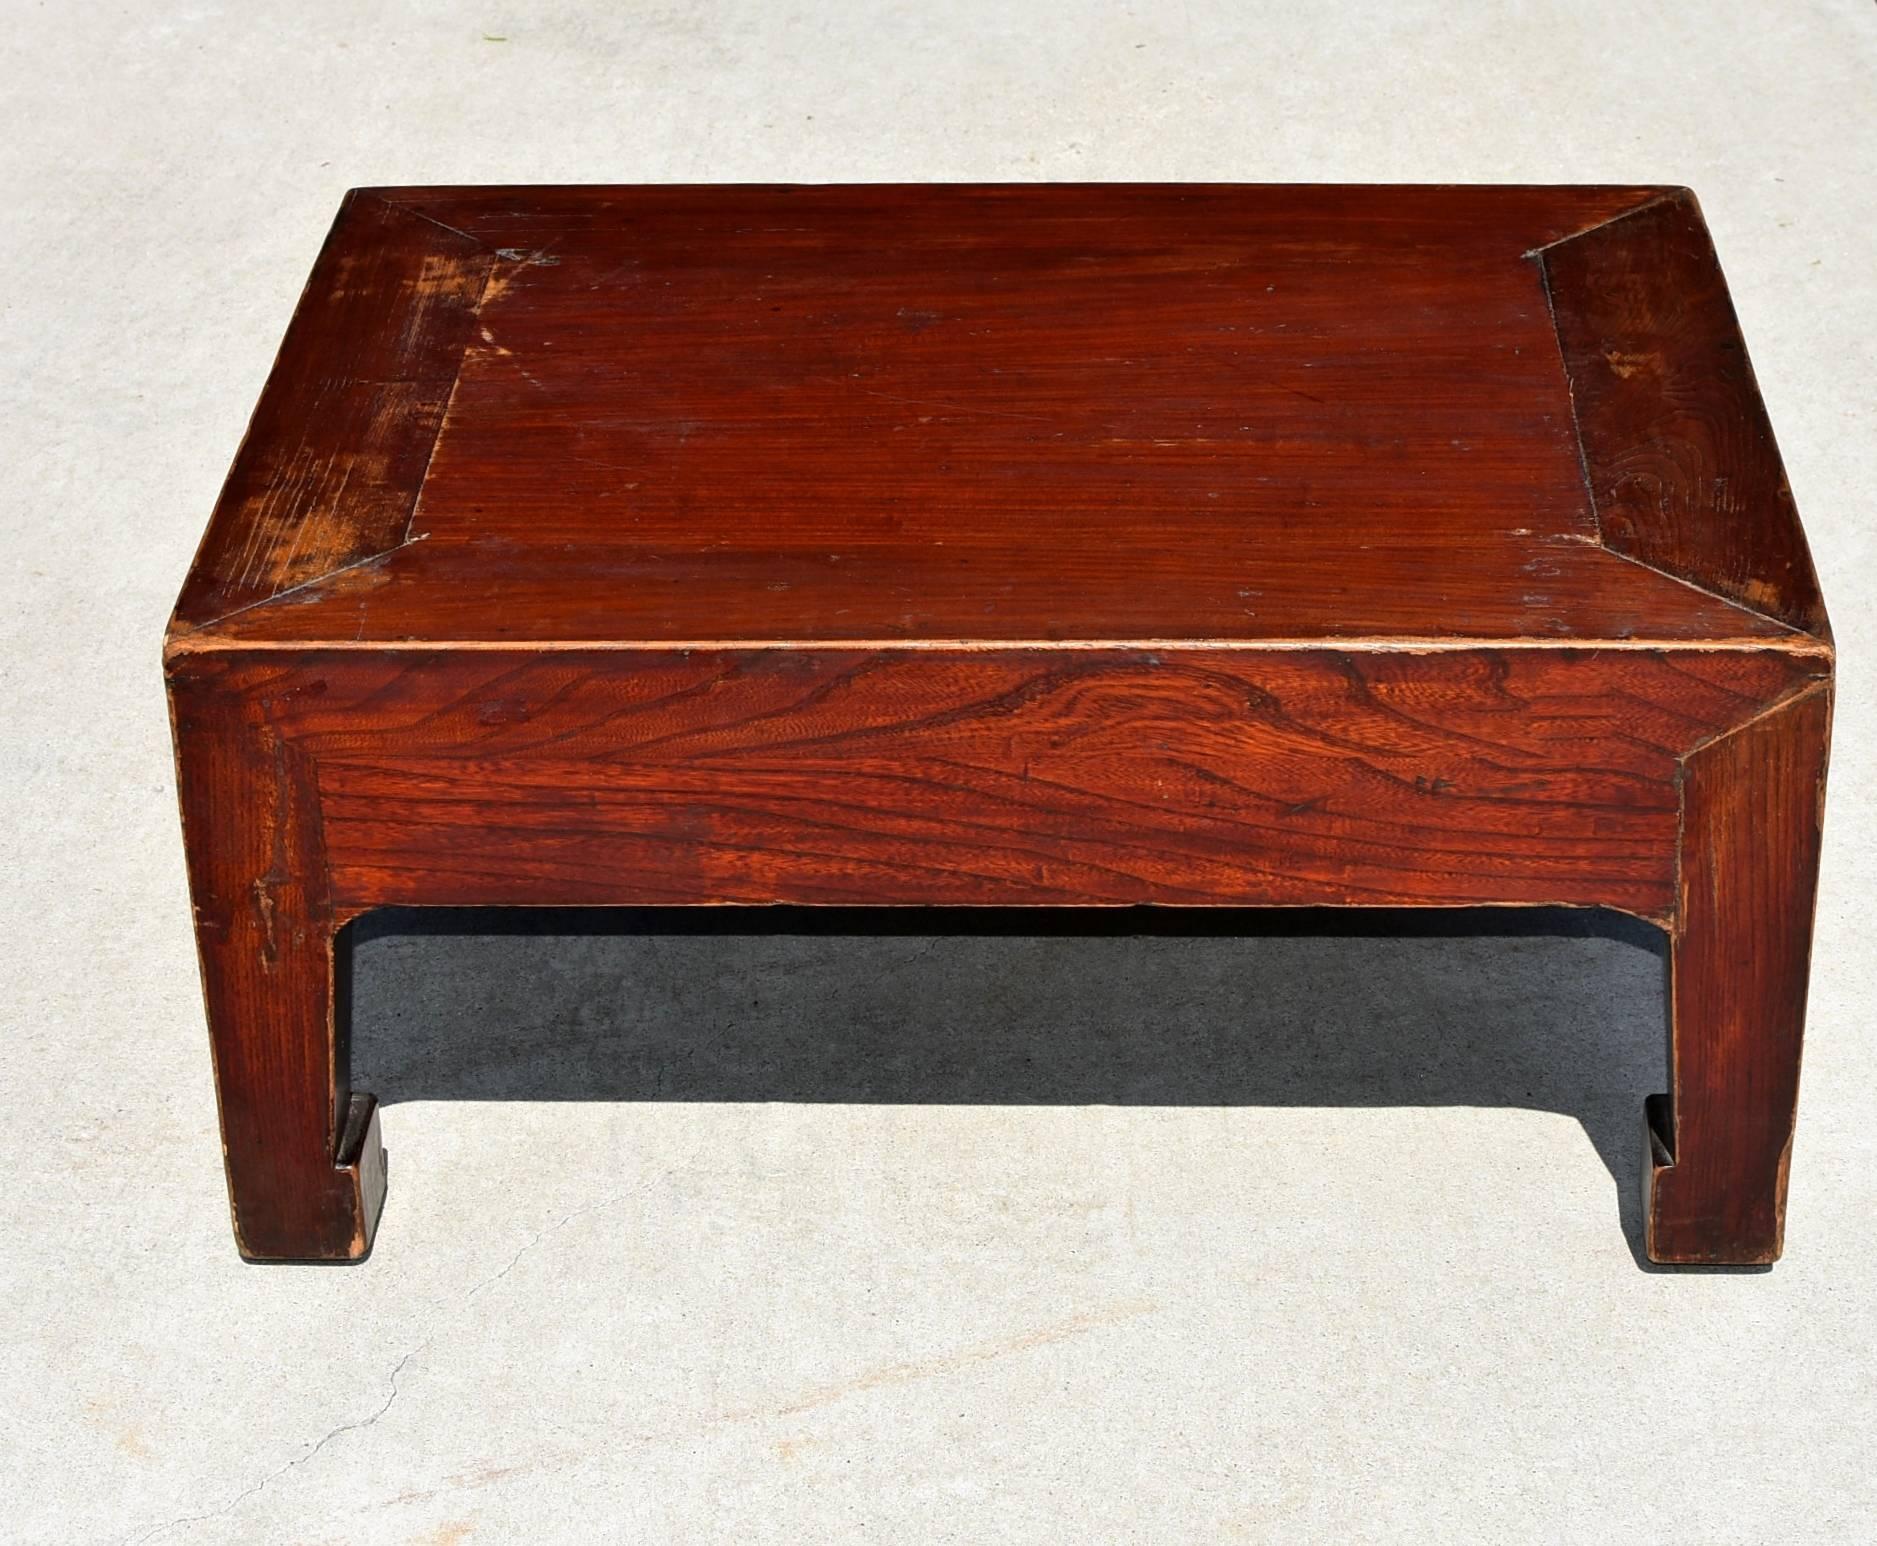 Beautiful low table is all solid wood with beautiful, reddish brown finish. Choice elmwood. Hoof legs. Chunky top is a typical Northern Chinese design. A versatile piece that can be used as a seat, table and a stand.

Solid wood. Tenons and